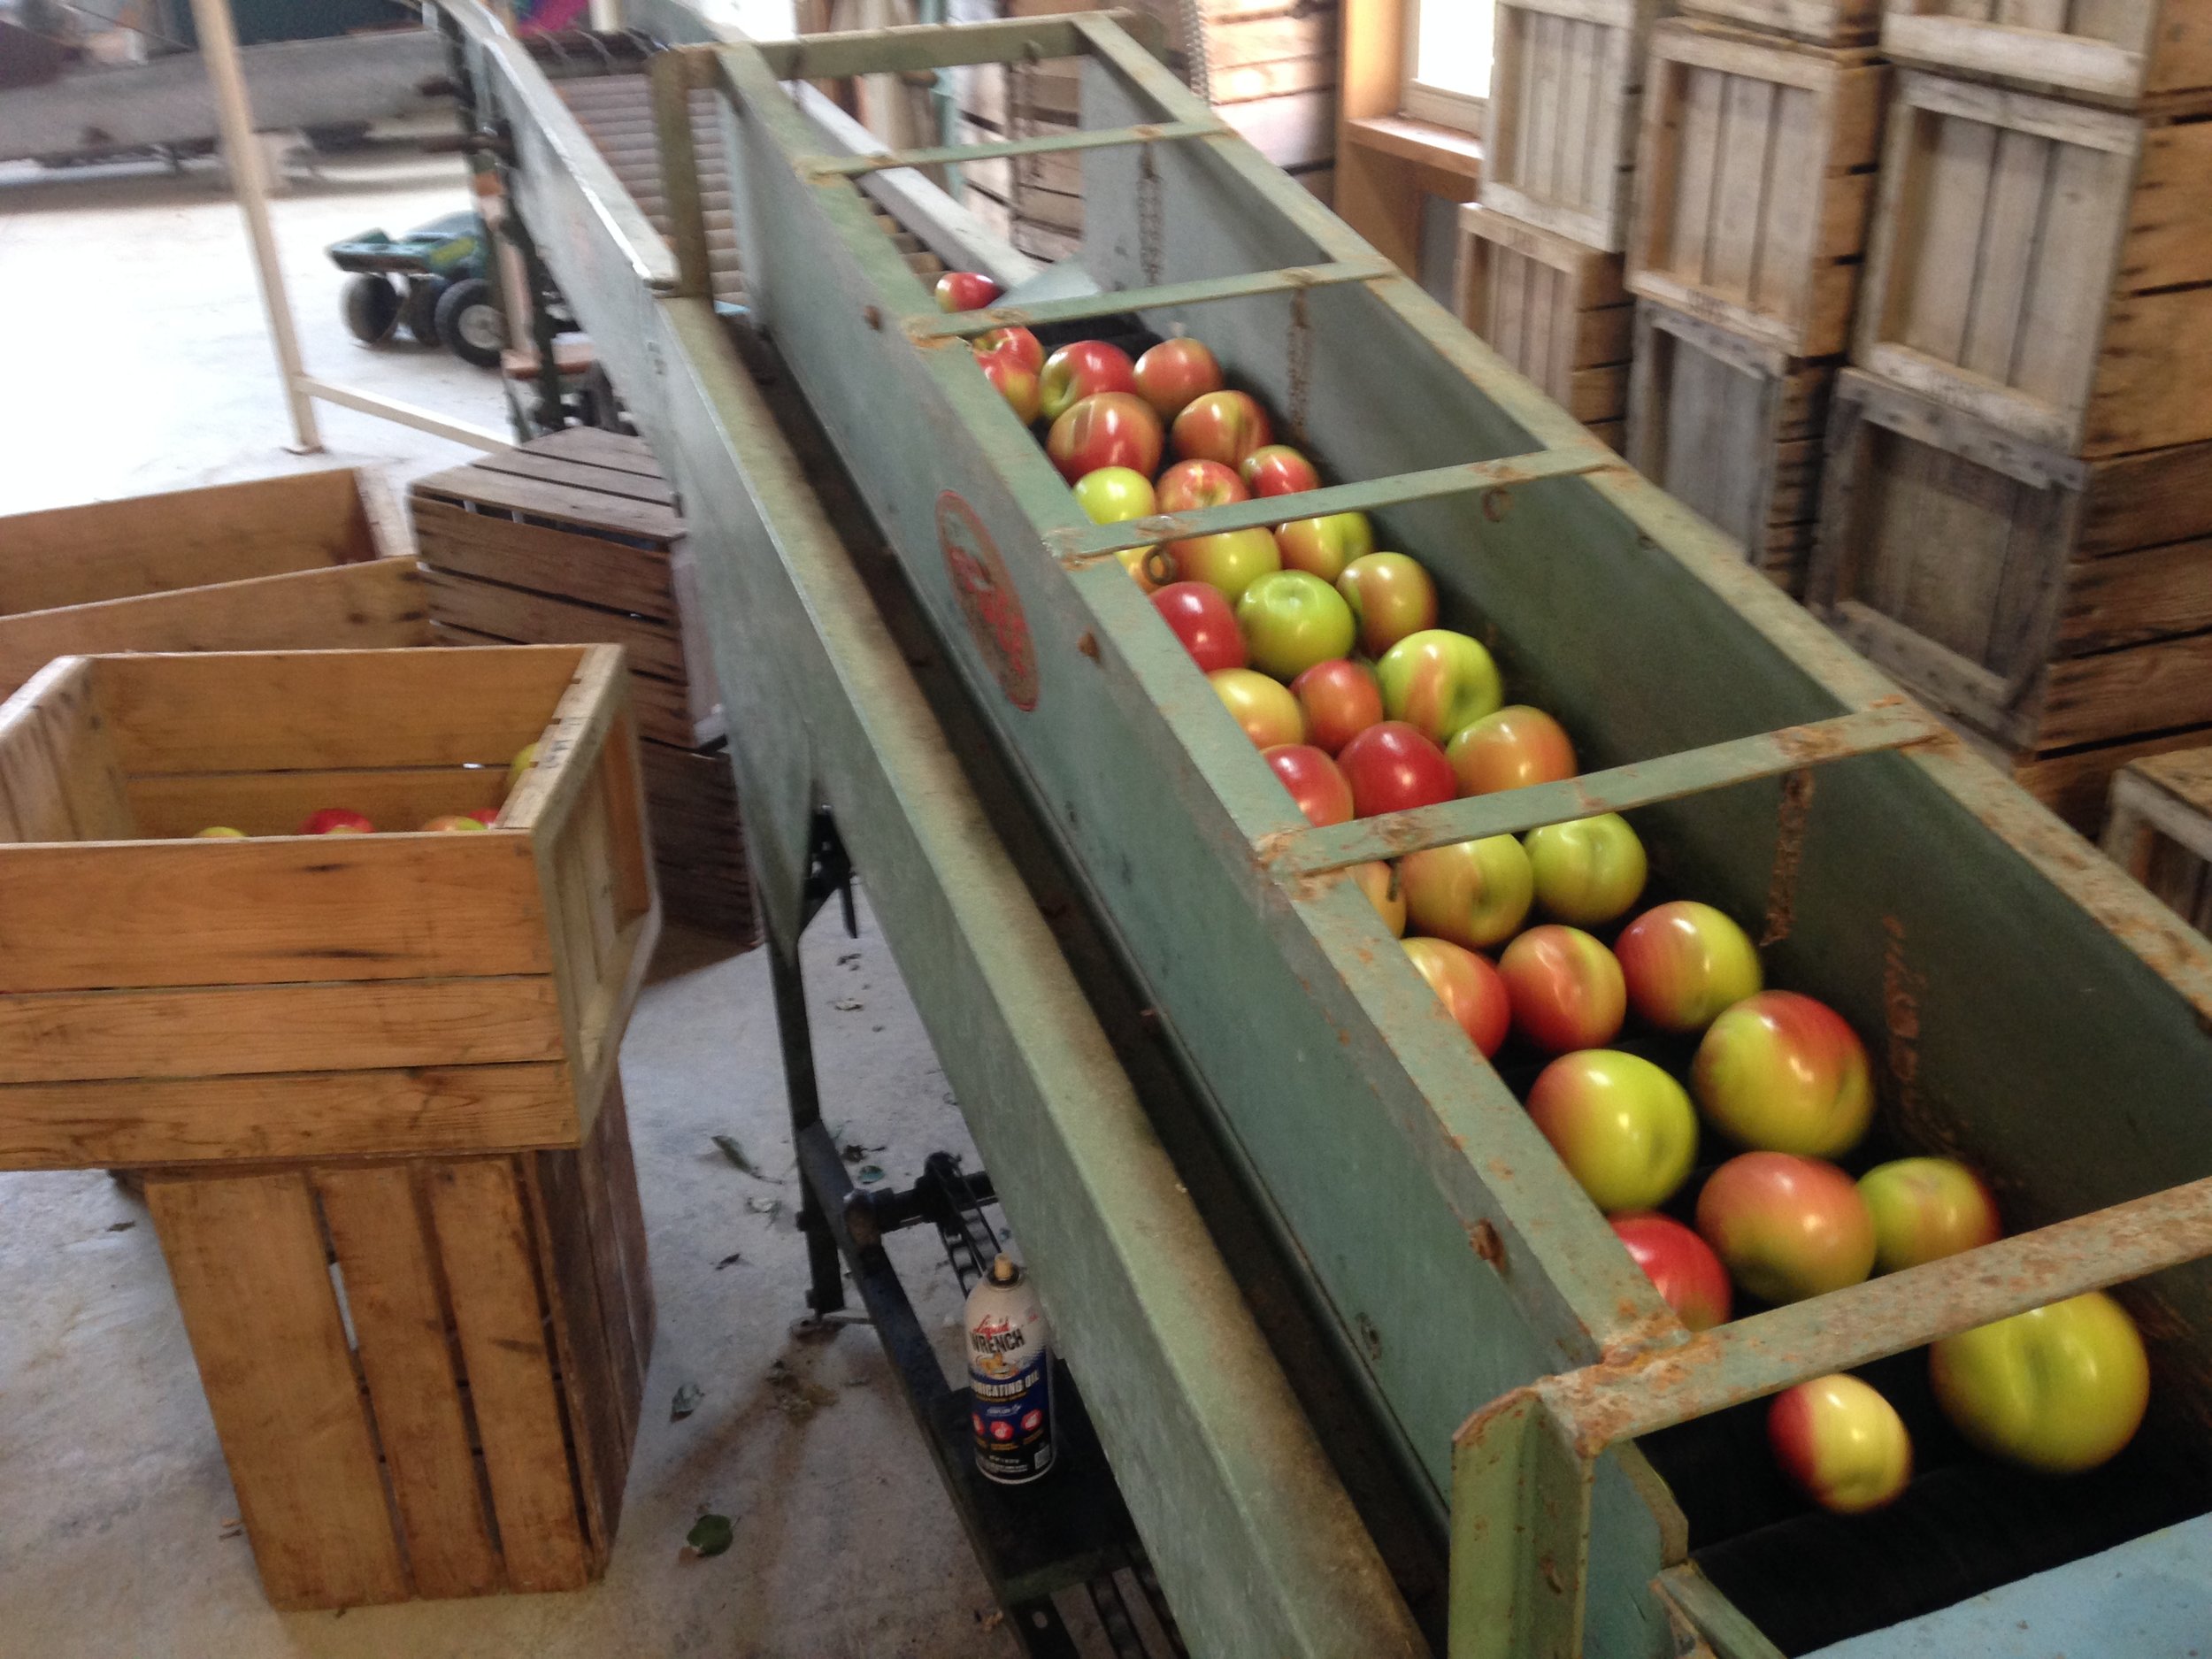 All apples are picked by hand, cleaned and sorted before being sold